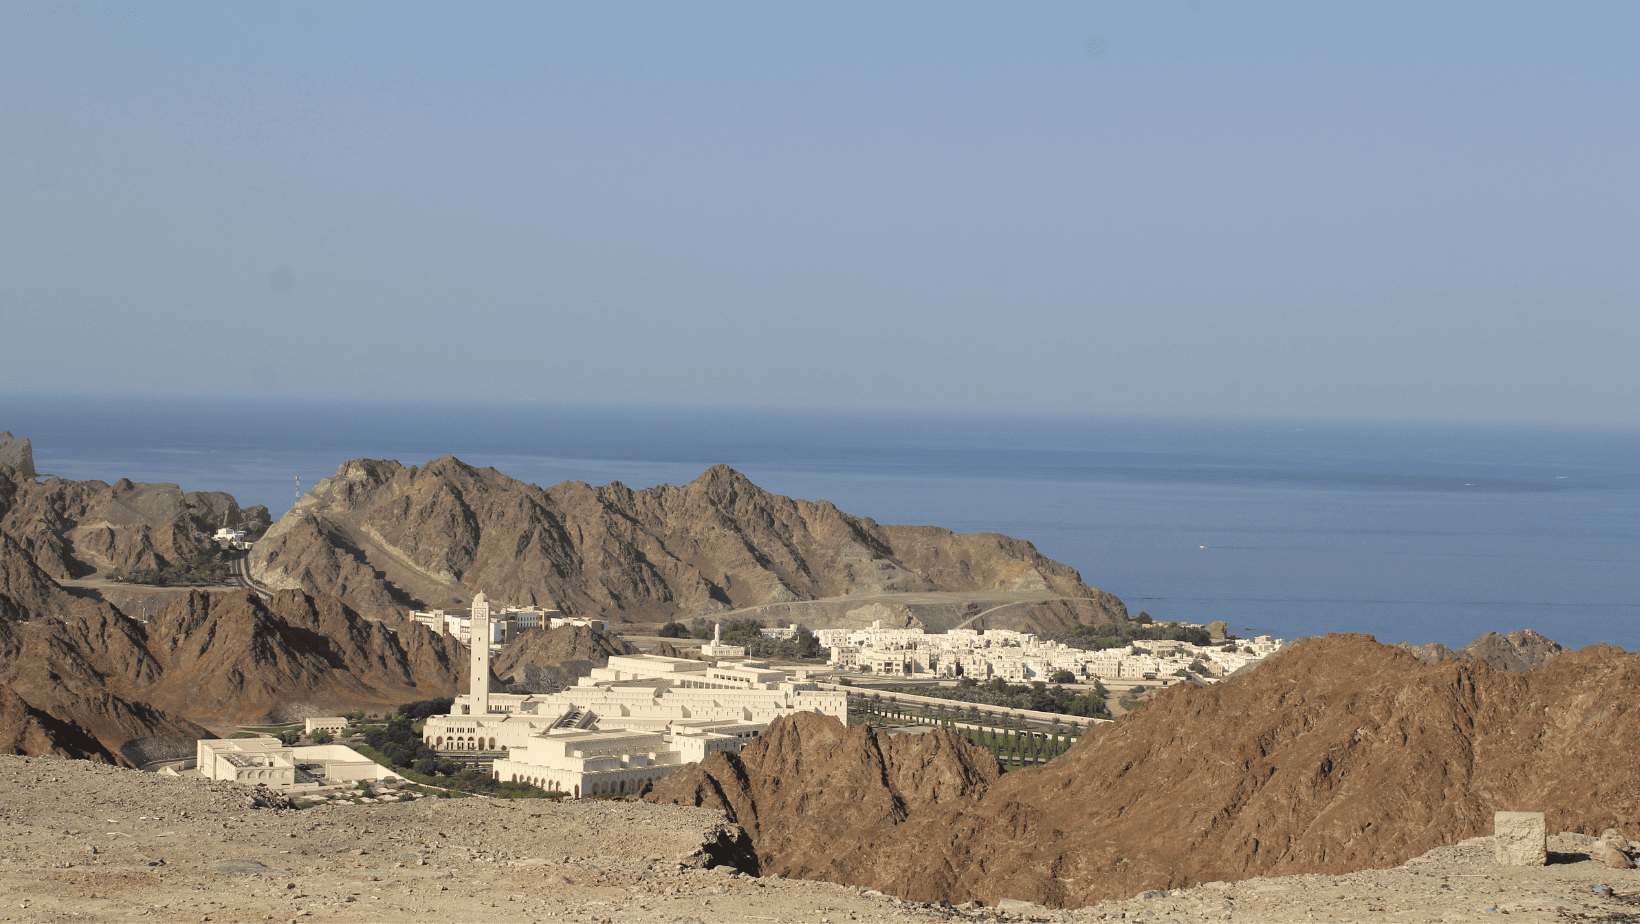 A view of Qantab beach and town from a nearby mountain.